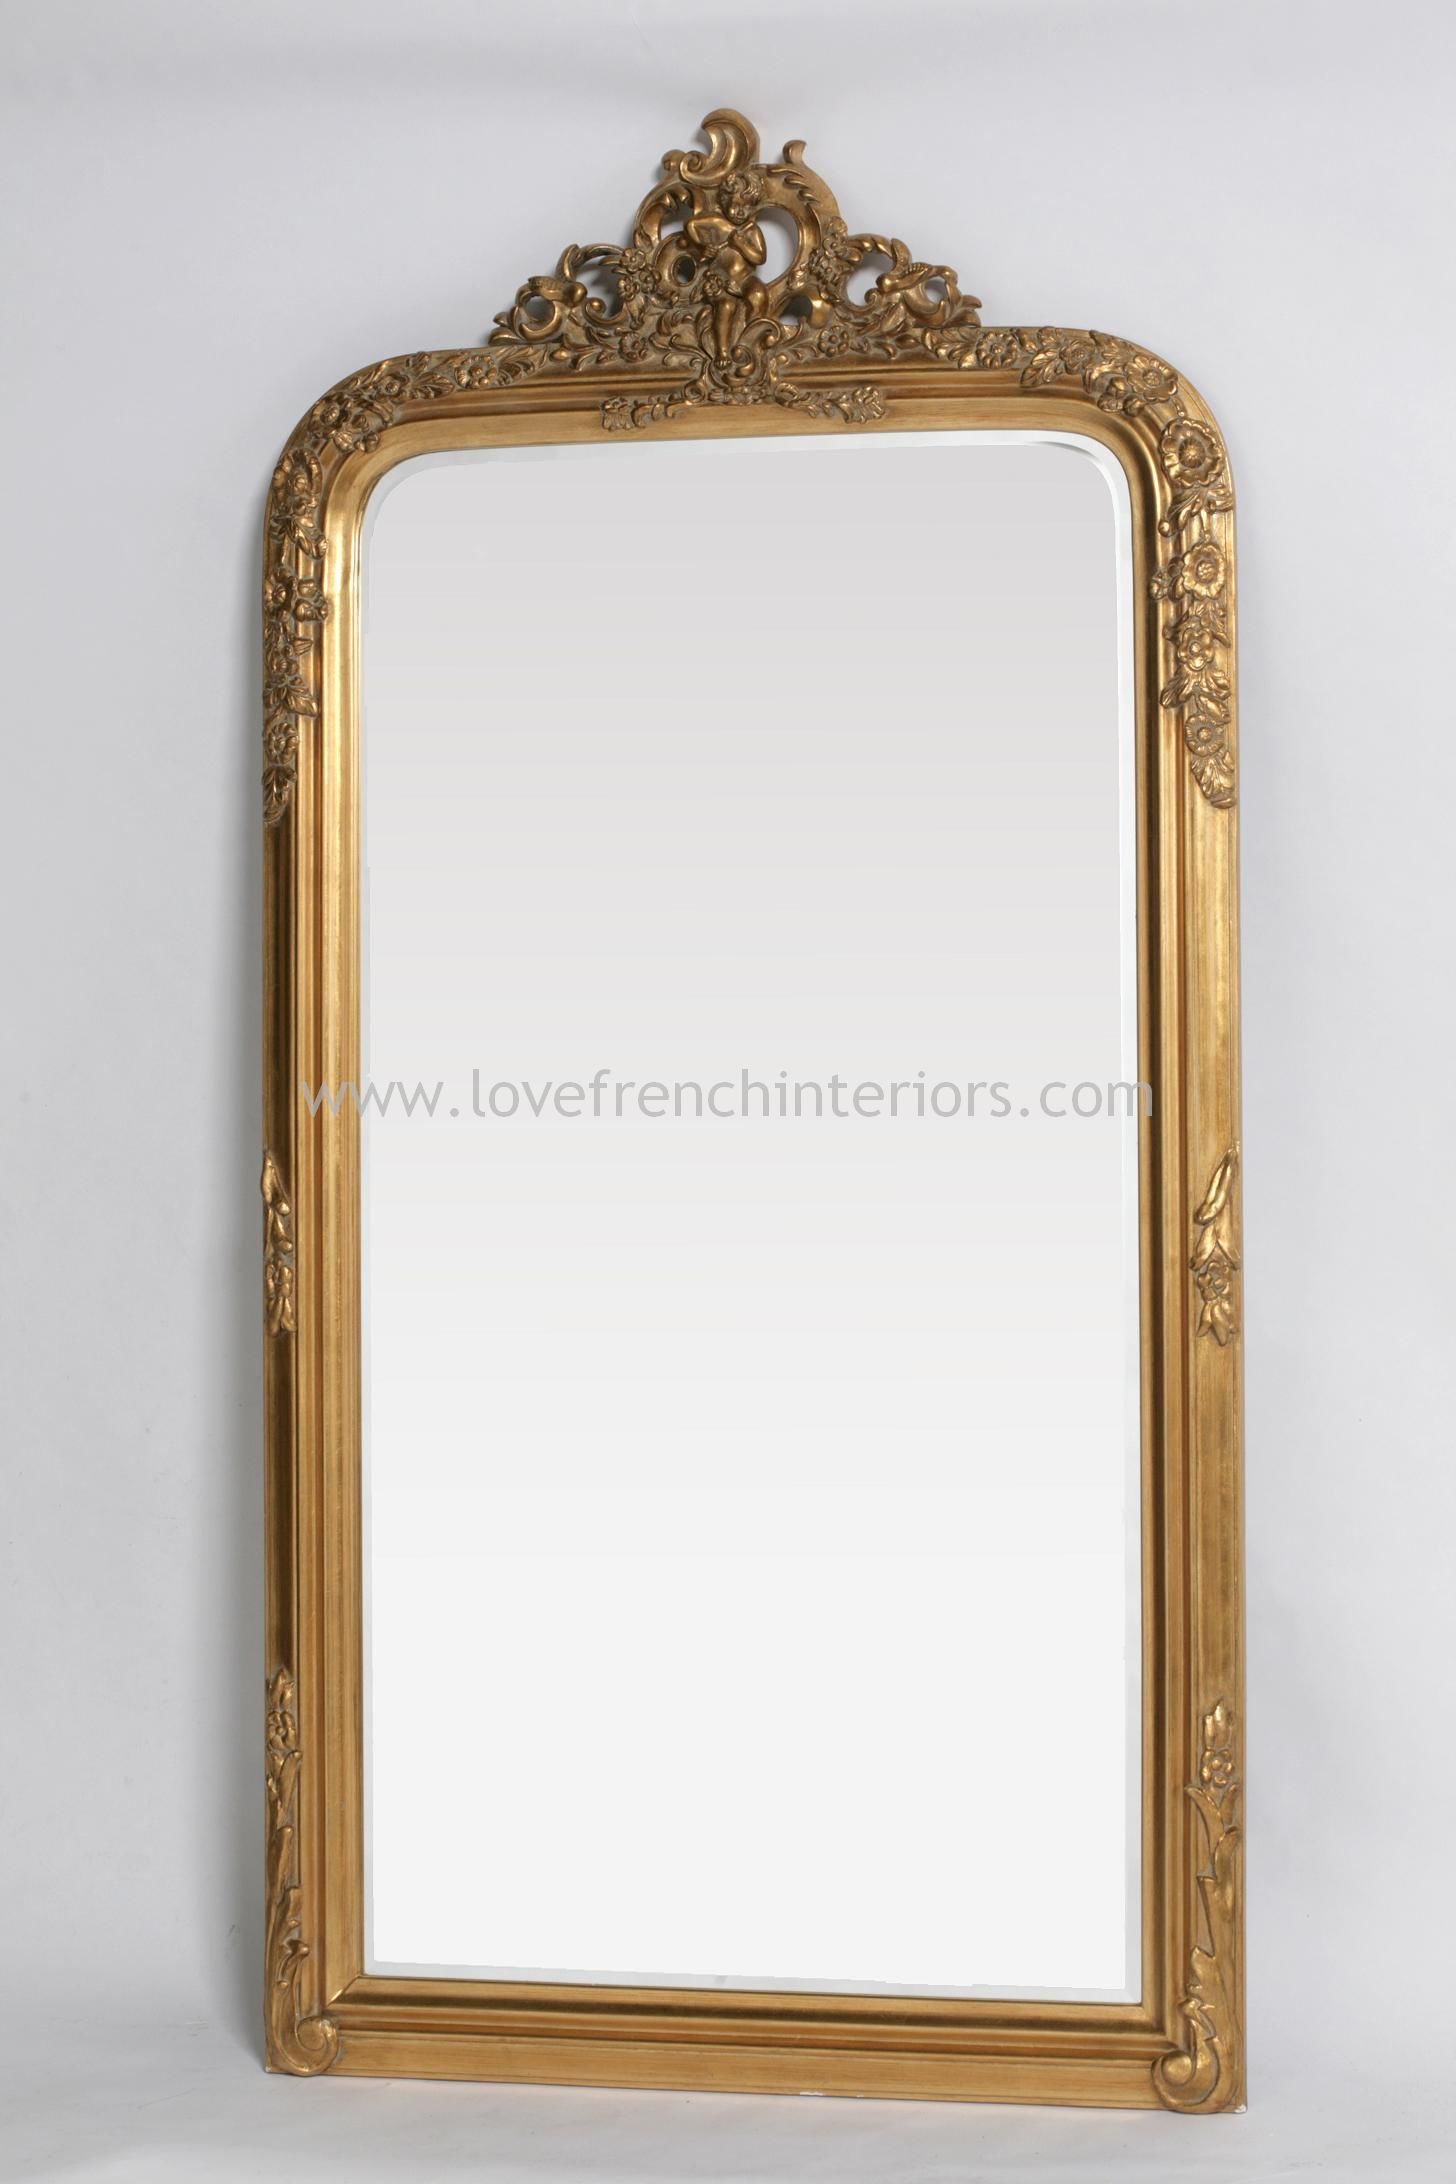 Antique Gold Floor Standing Mirror With Crest For Antiqued Bronze Floor Mirrors (View 5 of 15)